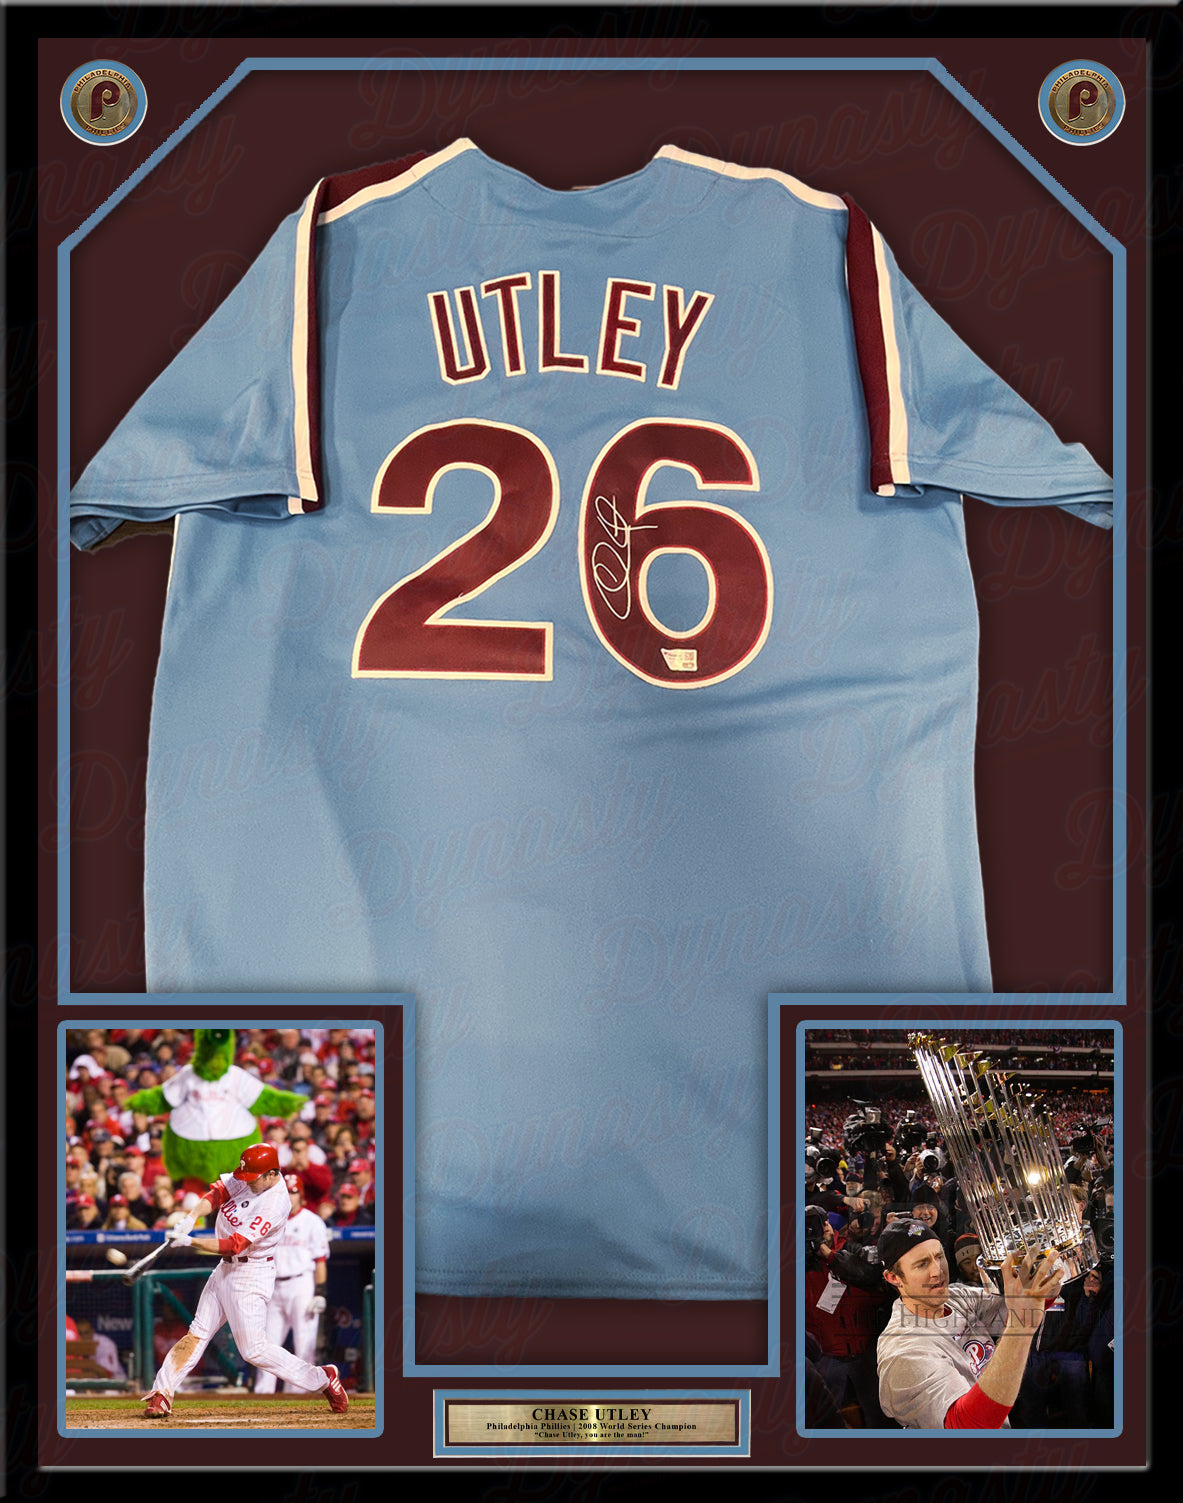 Chase Utley Philadelphia Phillies Autographed Framed Throwback Jersey